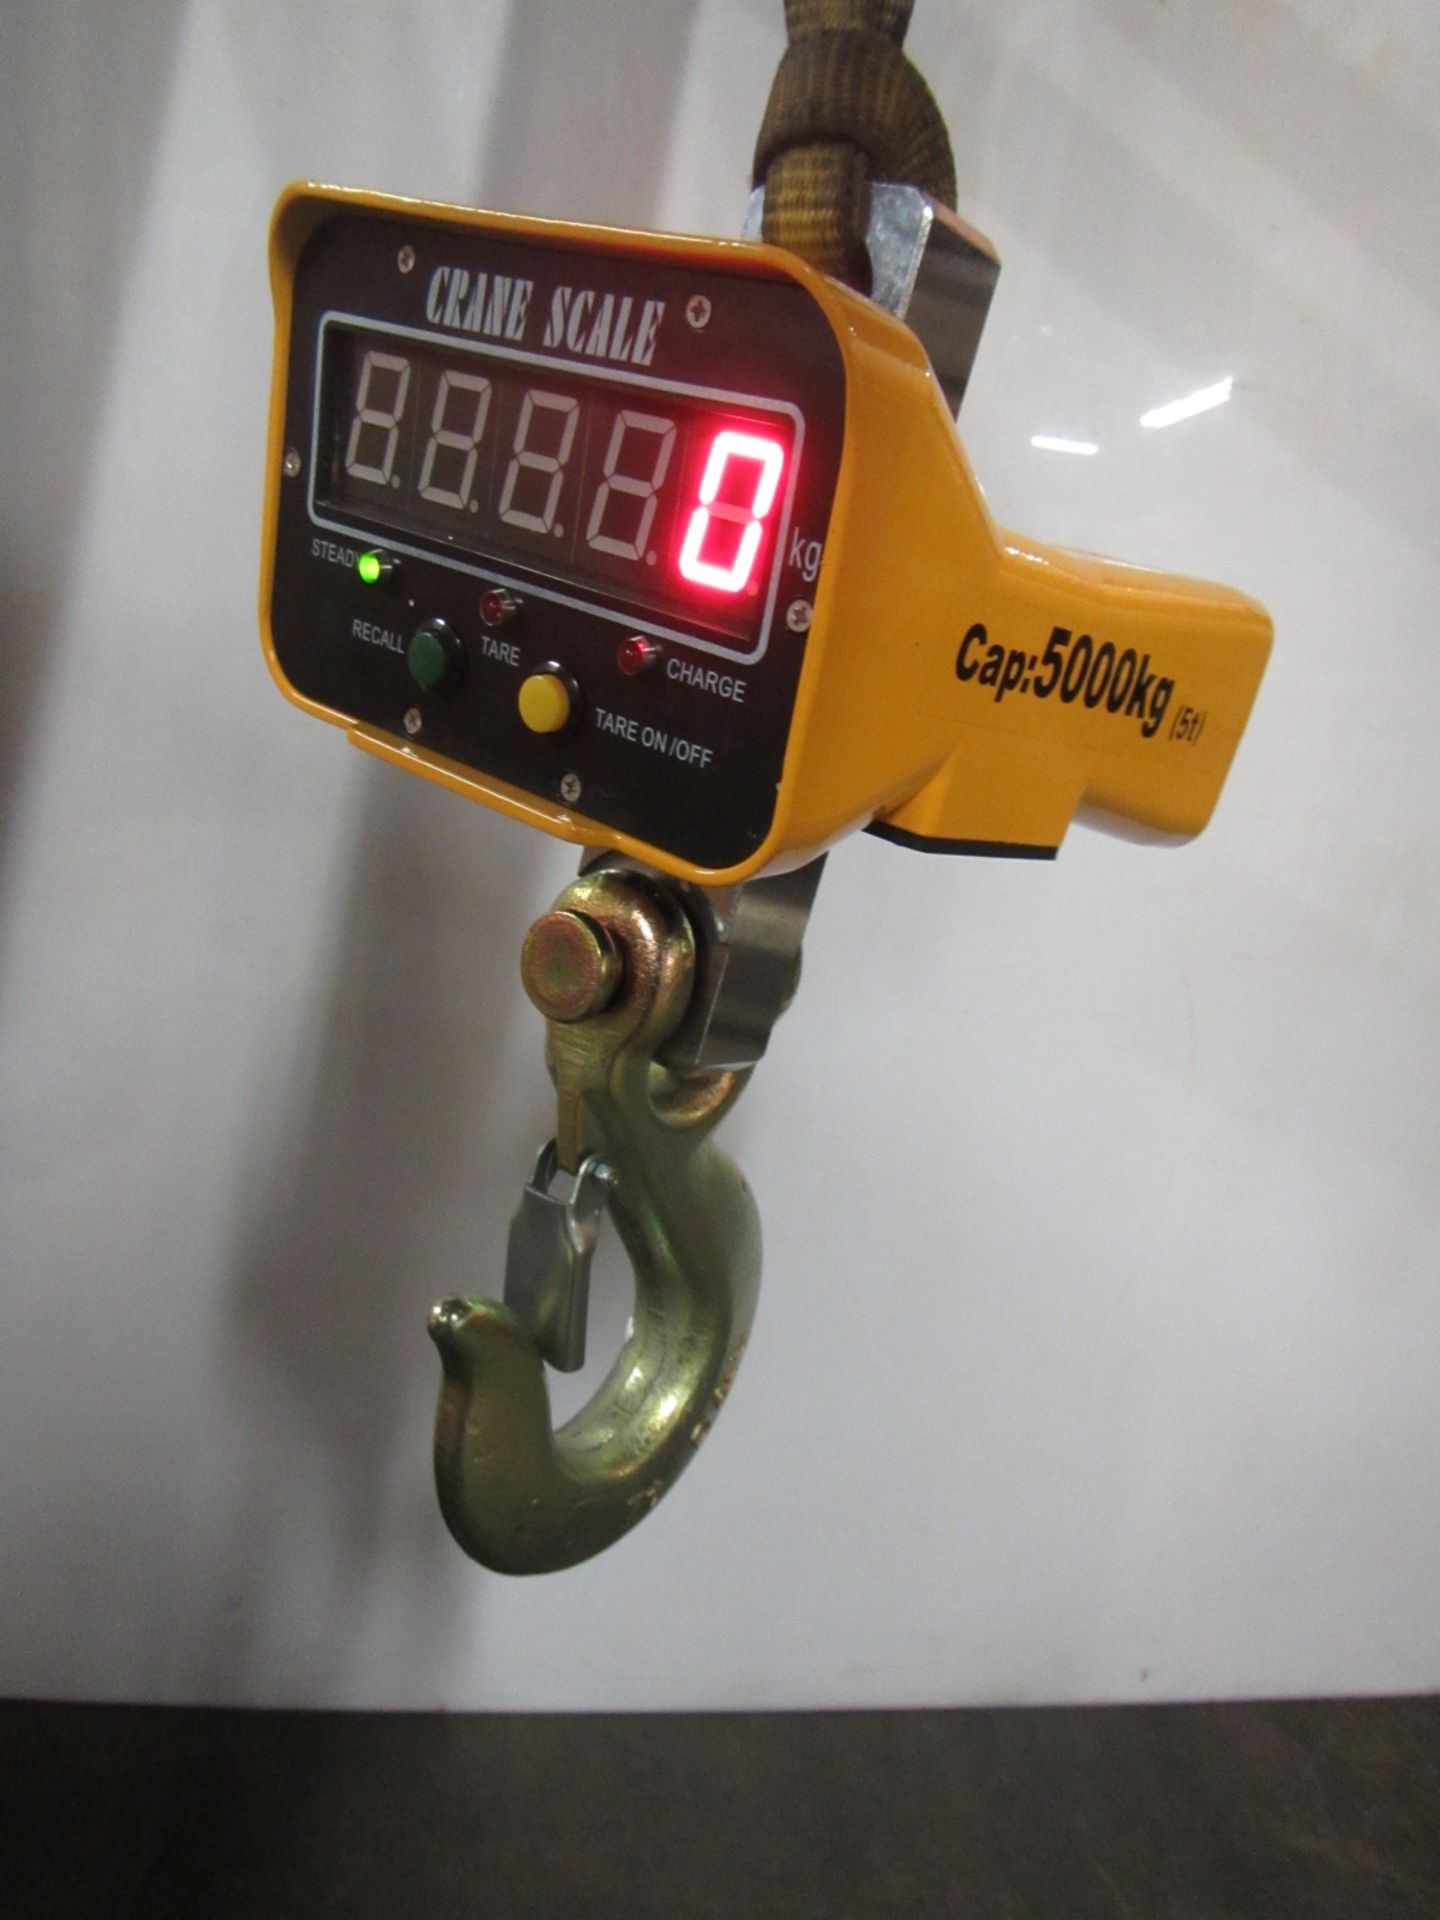 Hanging MINT Digital Crane Scale 10,000lbs 5 ton Capacity - complete with remote control and